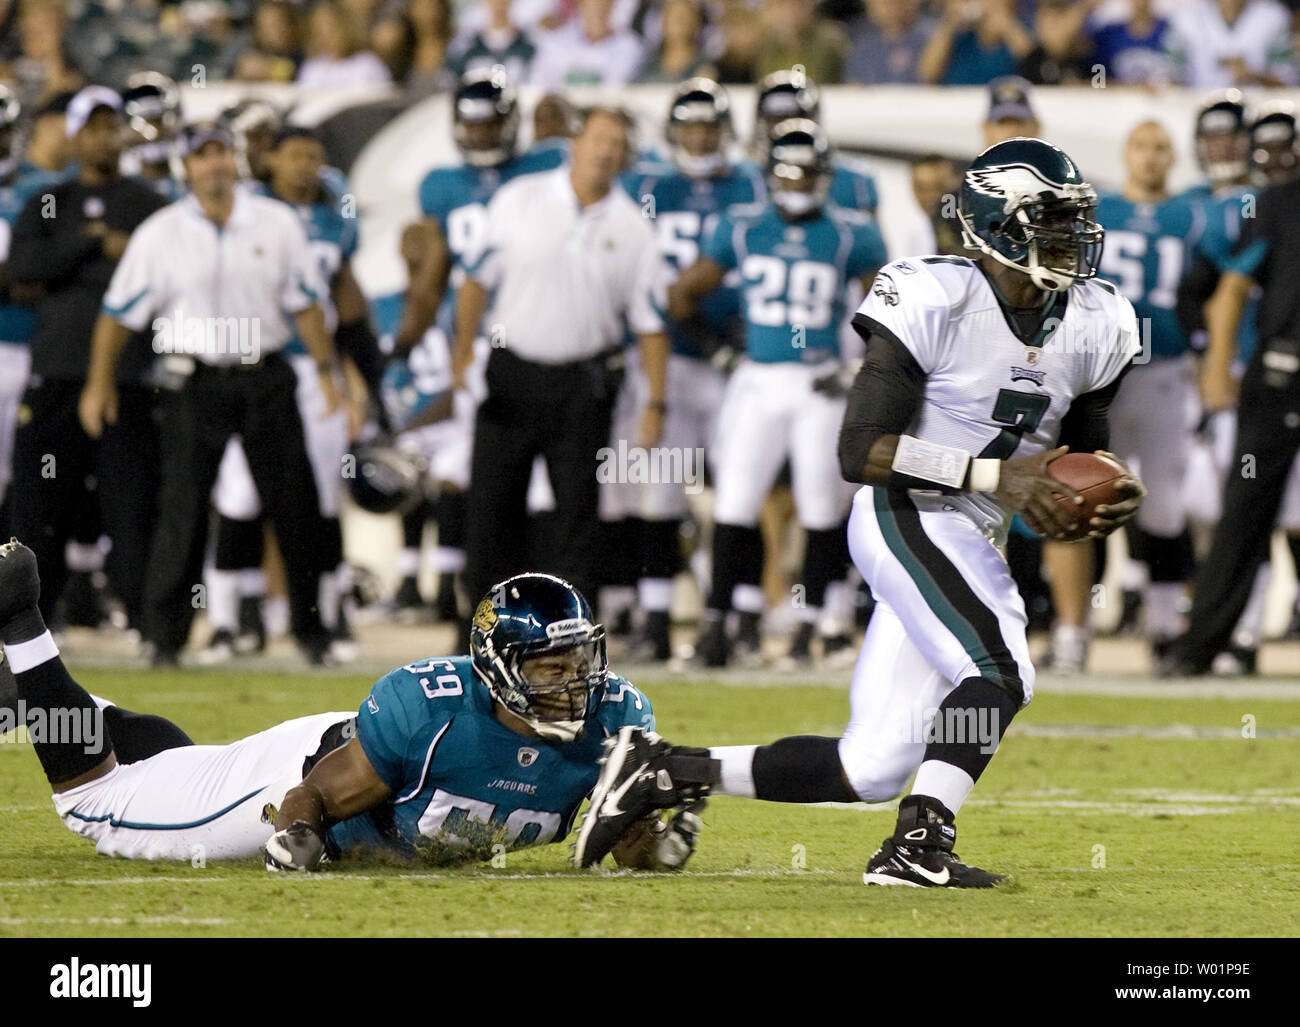 Jacksonville Jaguars Larry Hart trips up Philadelphia Eagles backup quarterback Michael Vick as he tries to run the ball to the goal line during second quarter Philadelphia Eagles-Jacksonville Jaguars game action in Philadelphia at Lincoln Financial Field August 13, 2010.      UPI/John Anderson Stock Photo